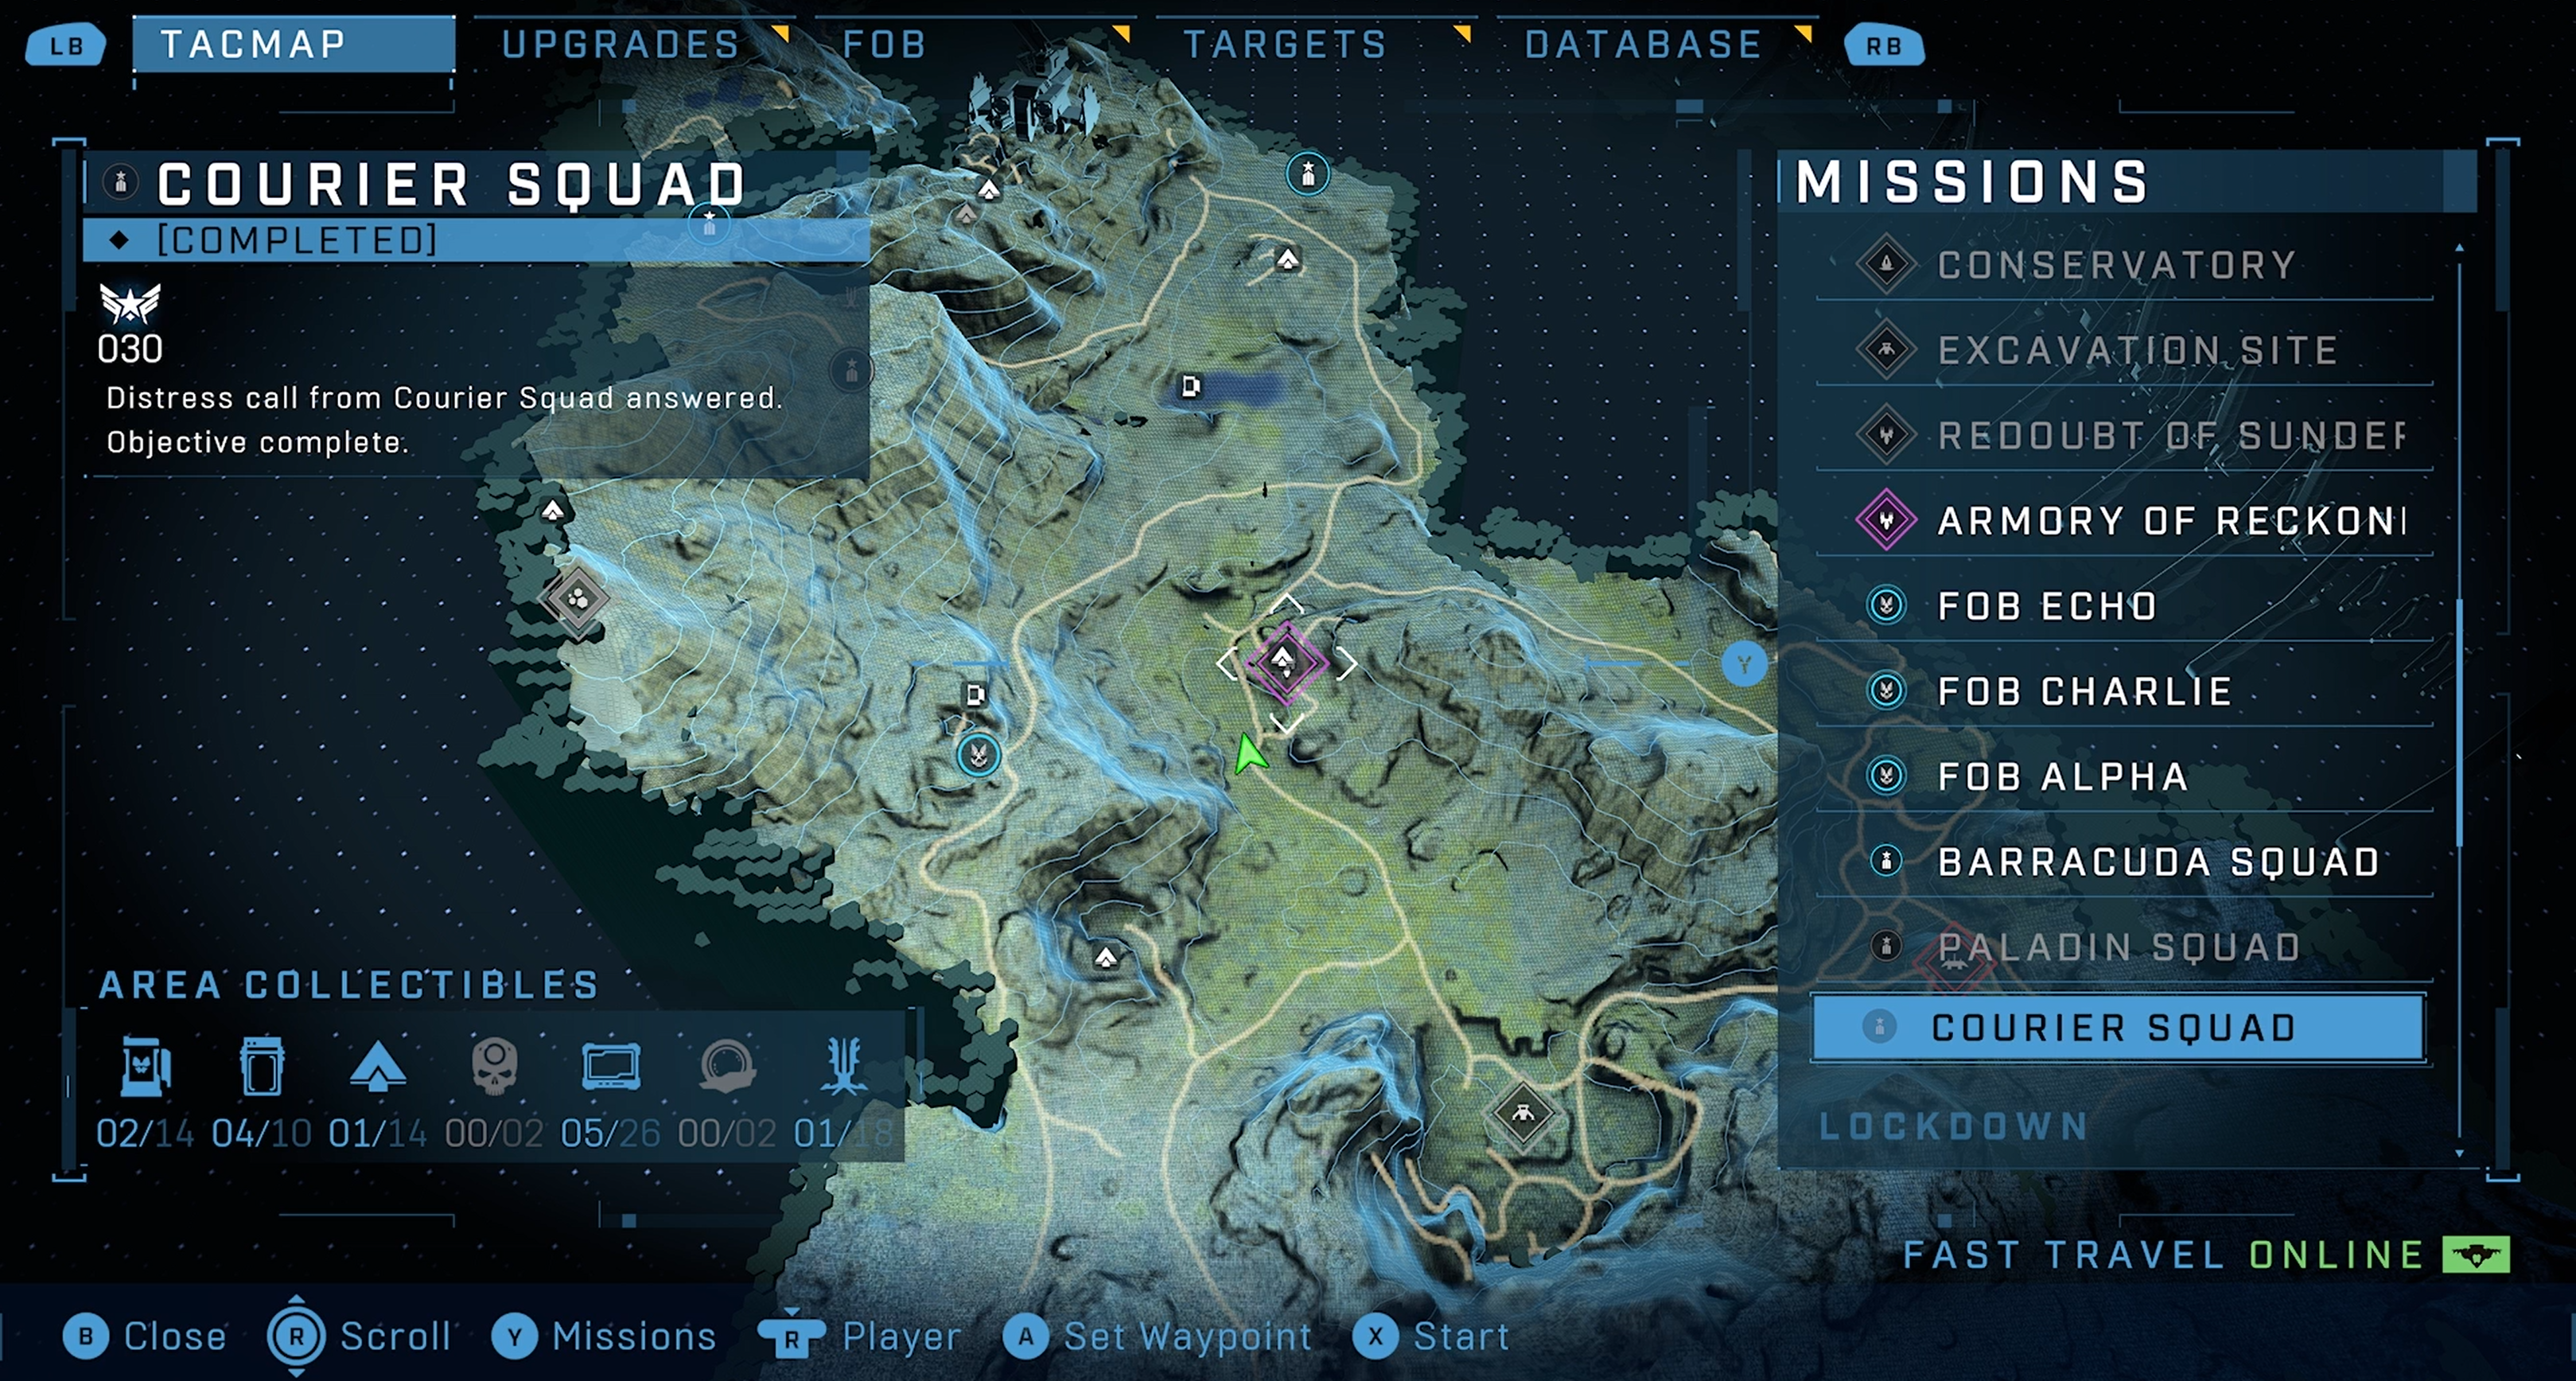 Halo Infinite screenshot of the Tacmap showing the in-game world map. On the right is a missions menu overlaid over the map with a list of missions. The focus is in this list on "The Courier.".